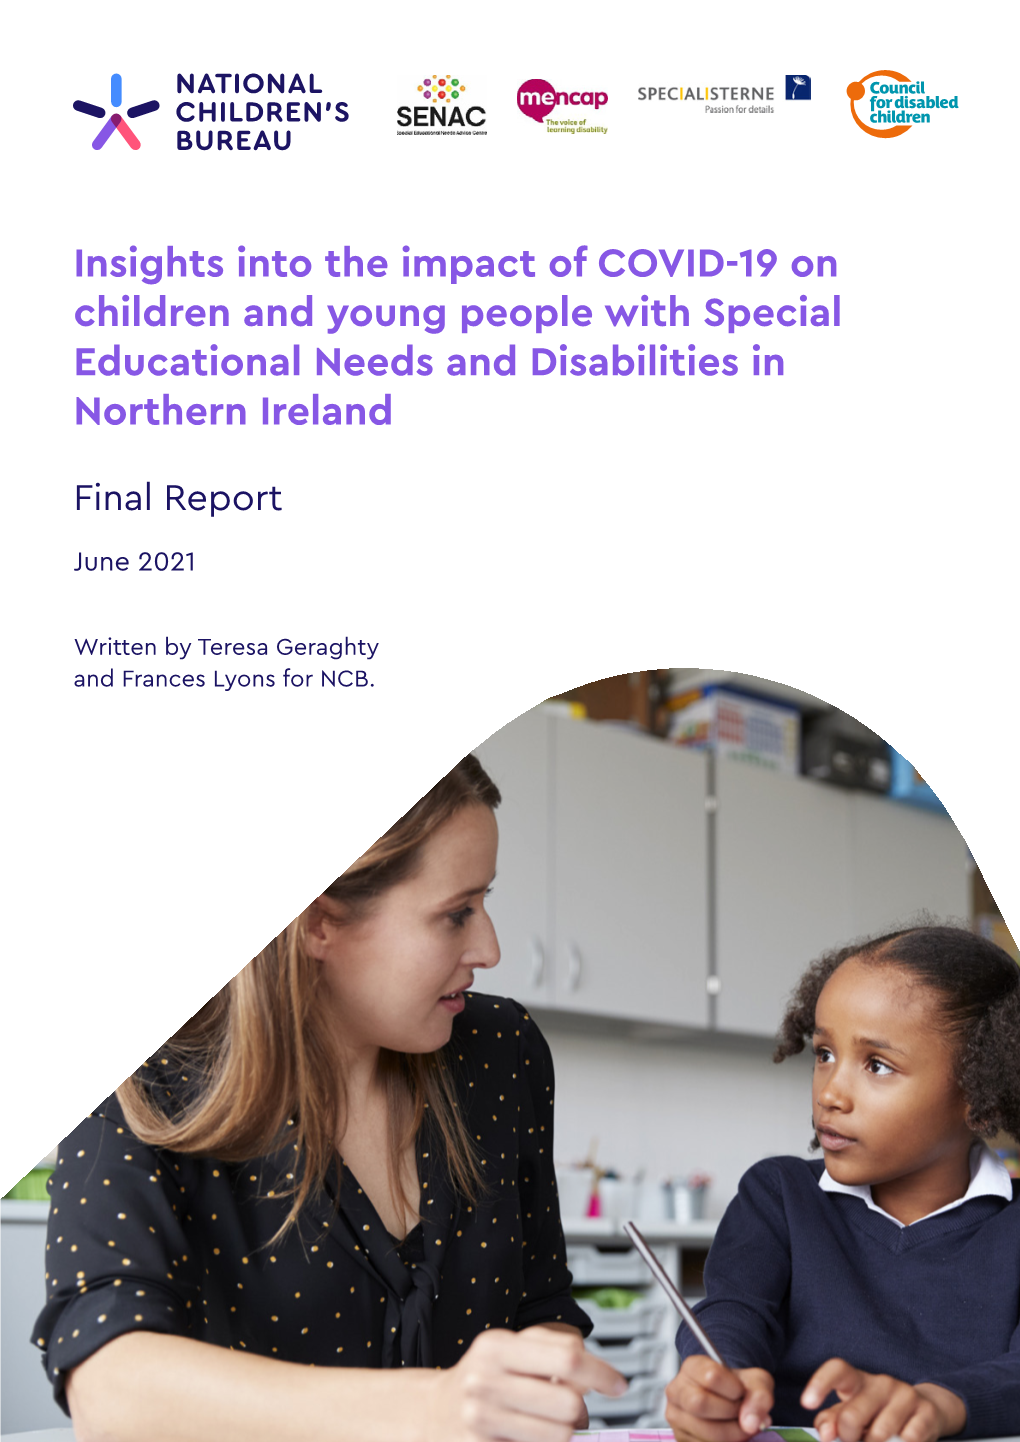 Insights Into the Impact of COVID-19 on Children and Young People with Special Educational Needs and Disabilities in Northern Ireland